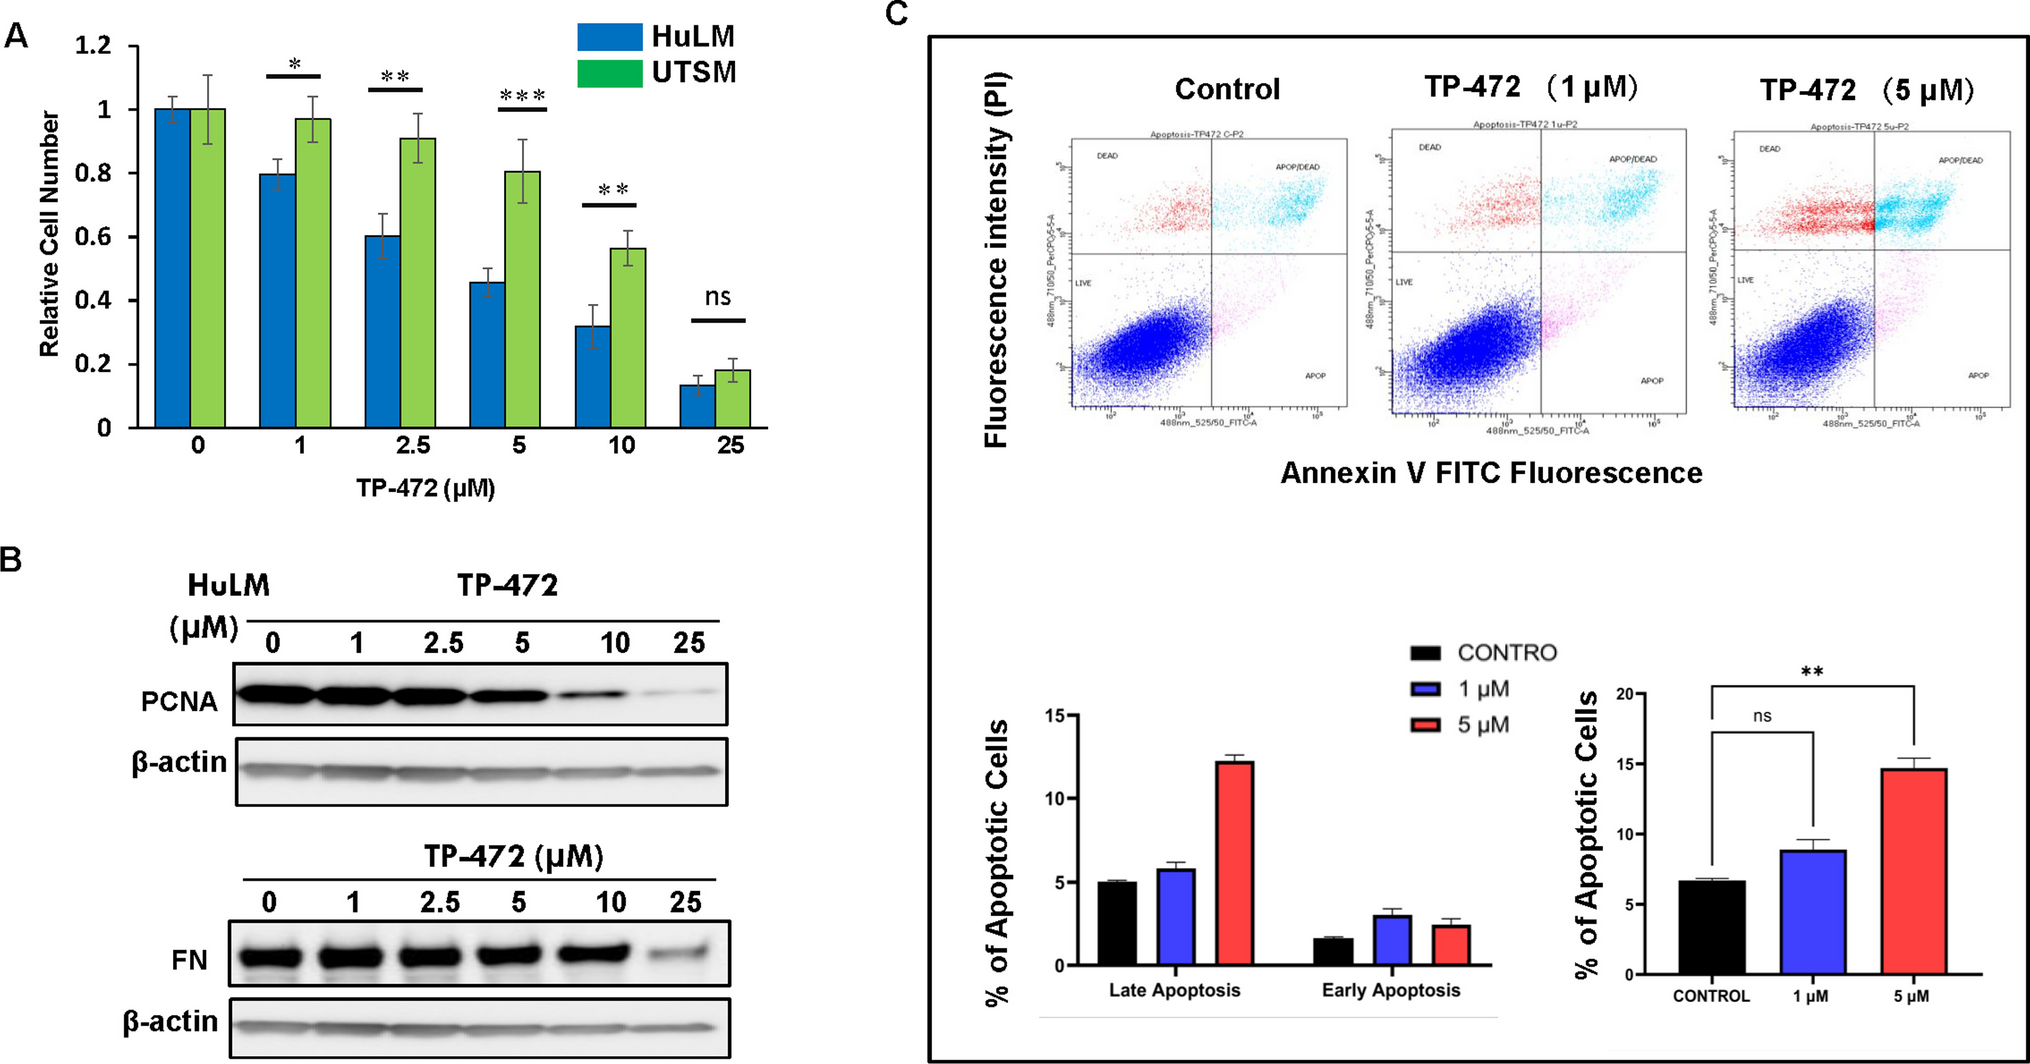 Targeting Bromodomain-Containing Protein 9 in Human Uterine Fibroid Cells